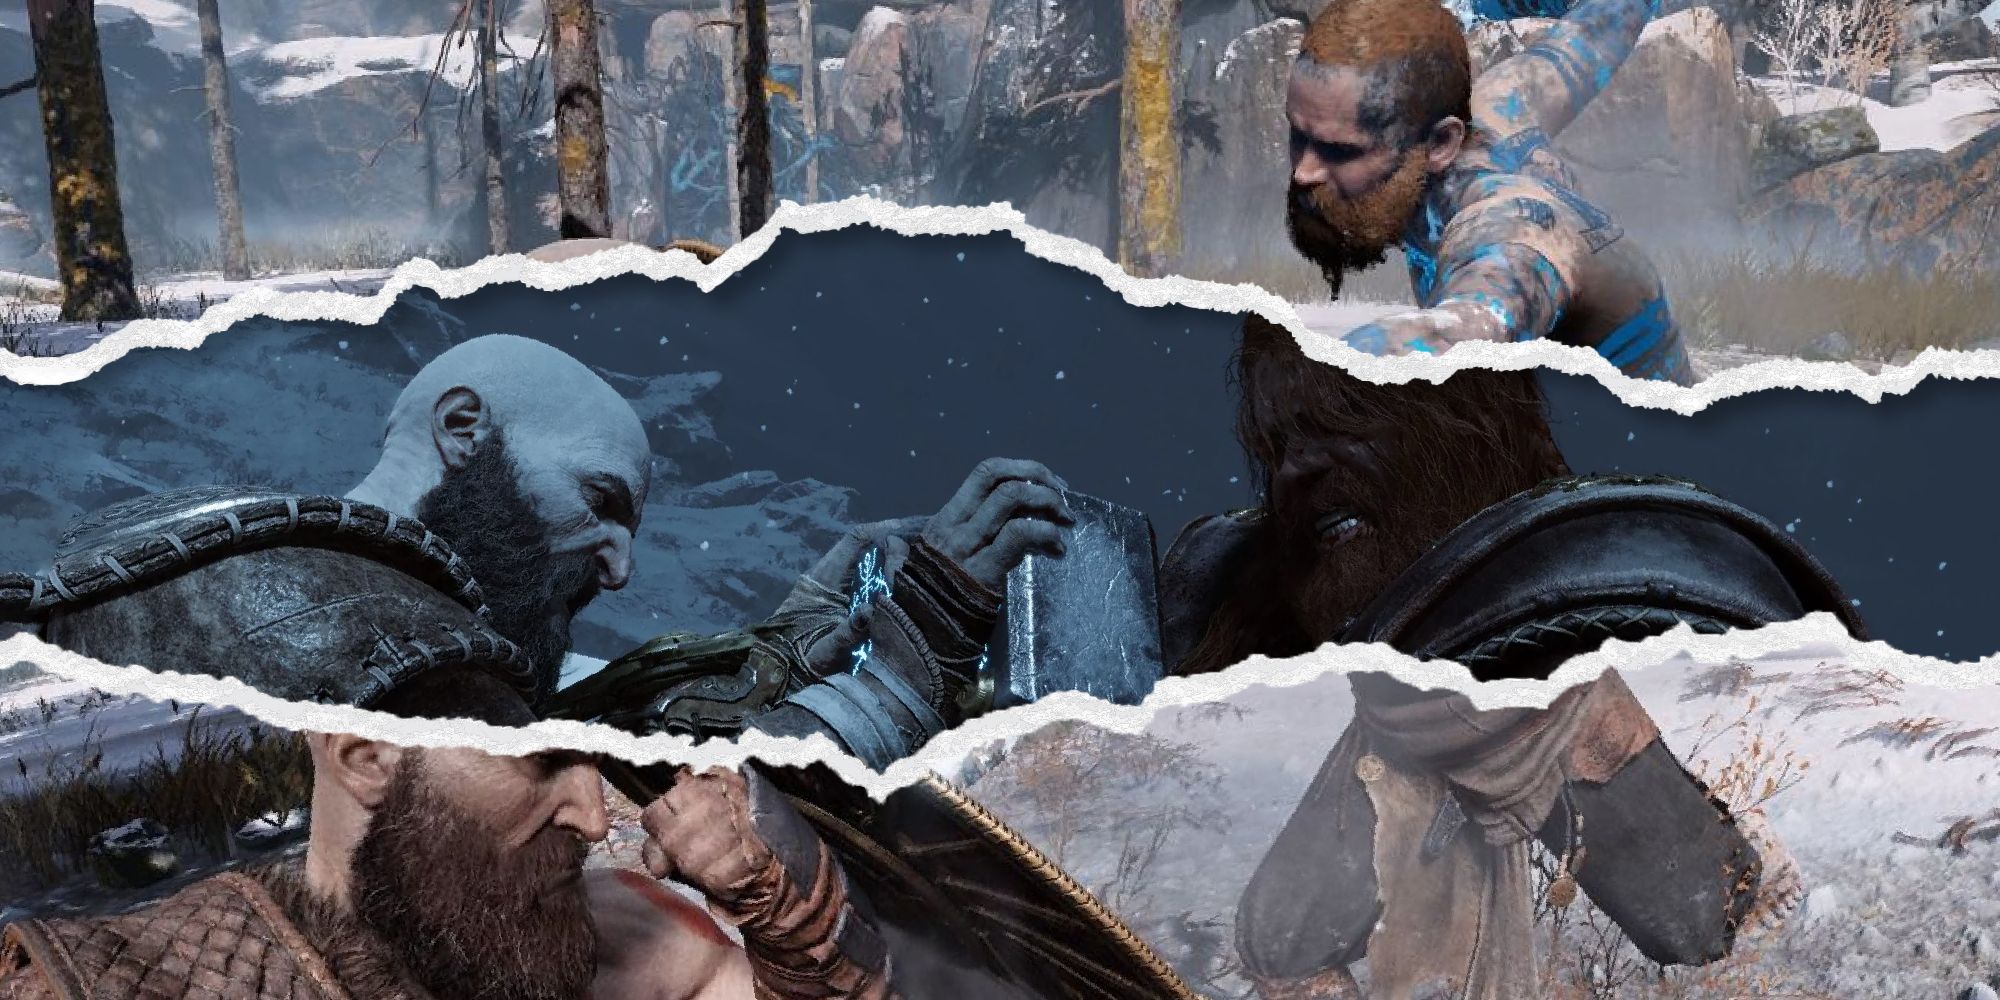 God of War Ragnarok: How Tall are Kratos, Thor, and Tyr Supposed to Be?